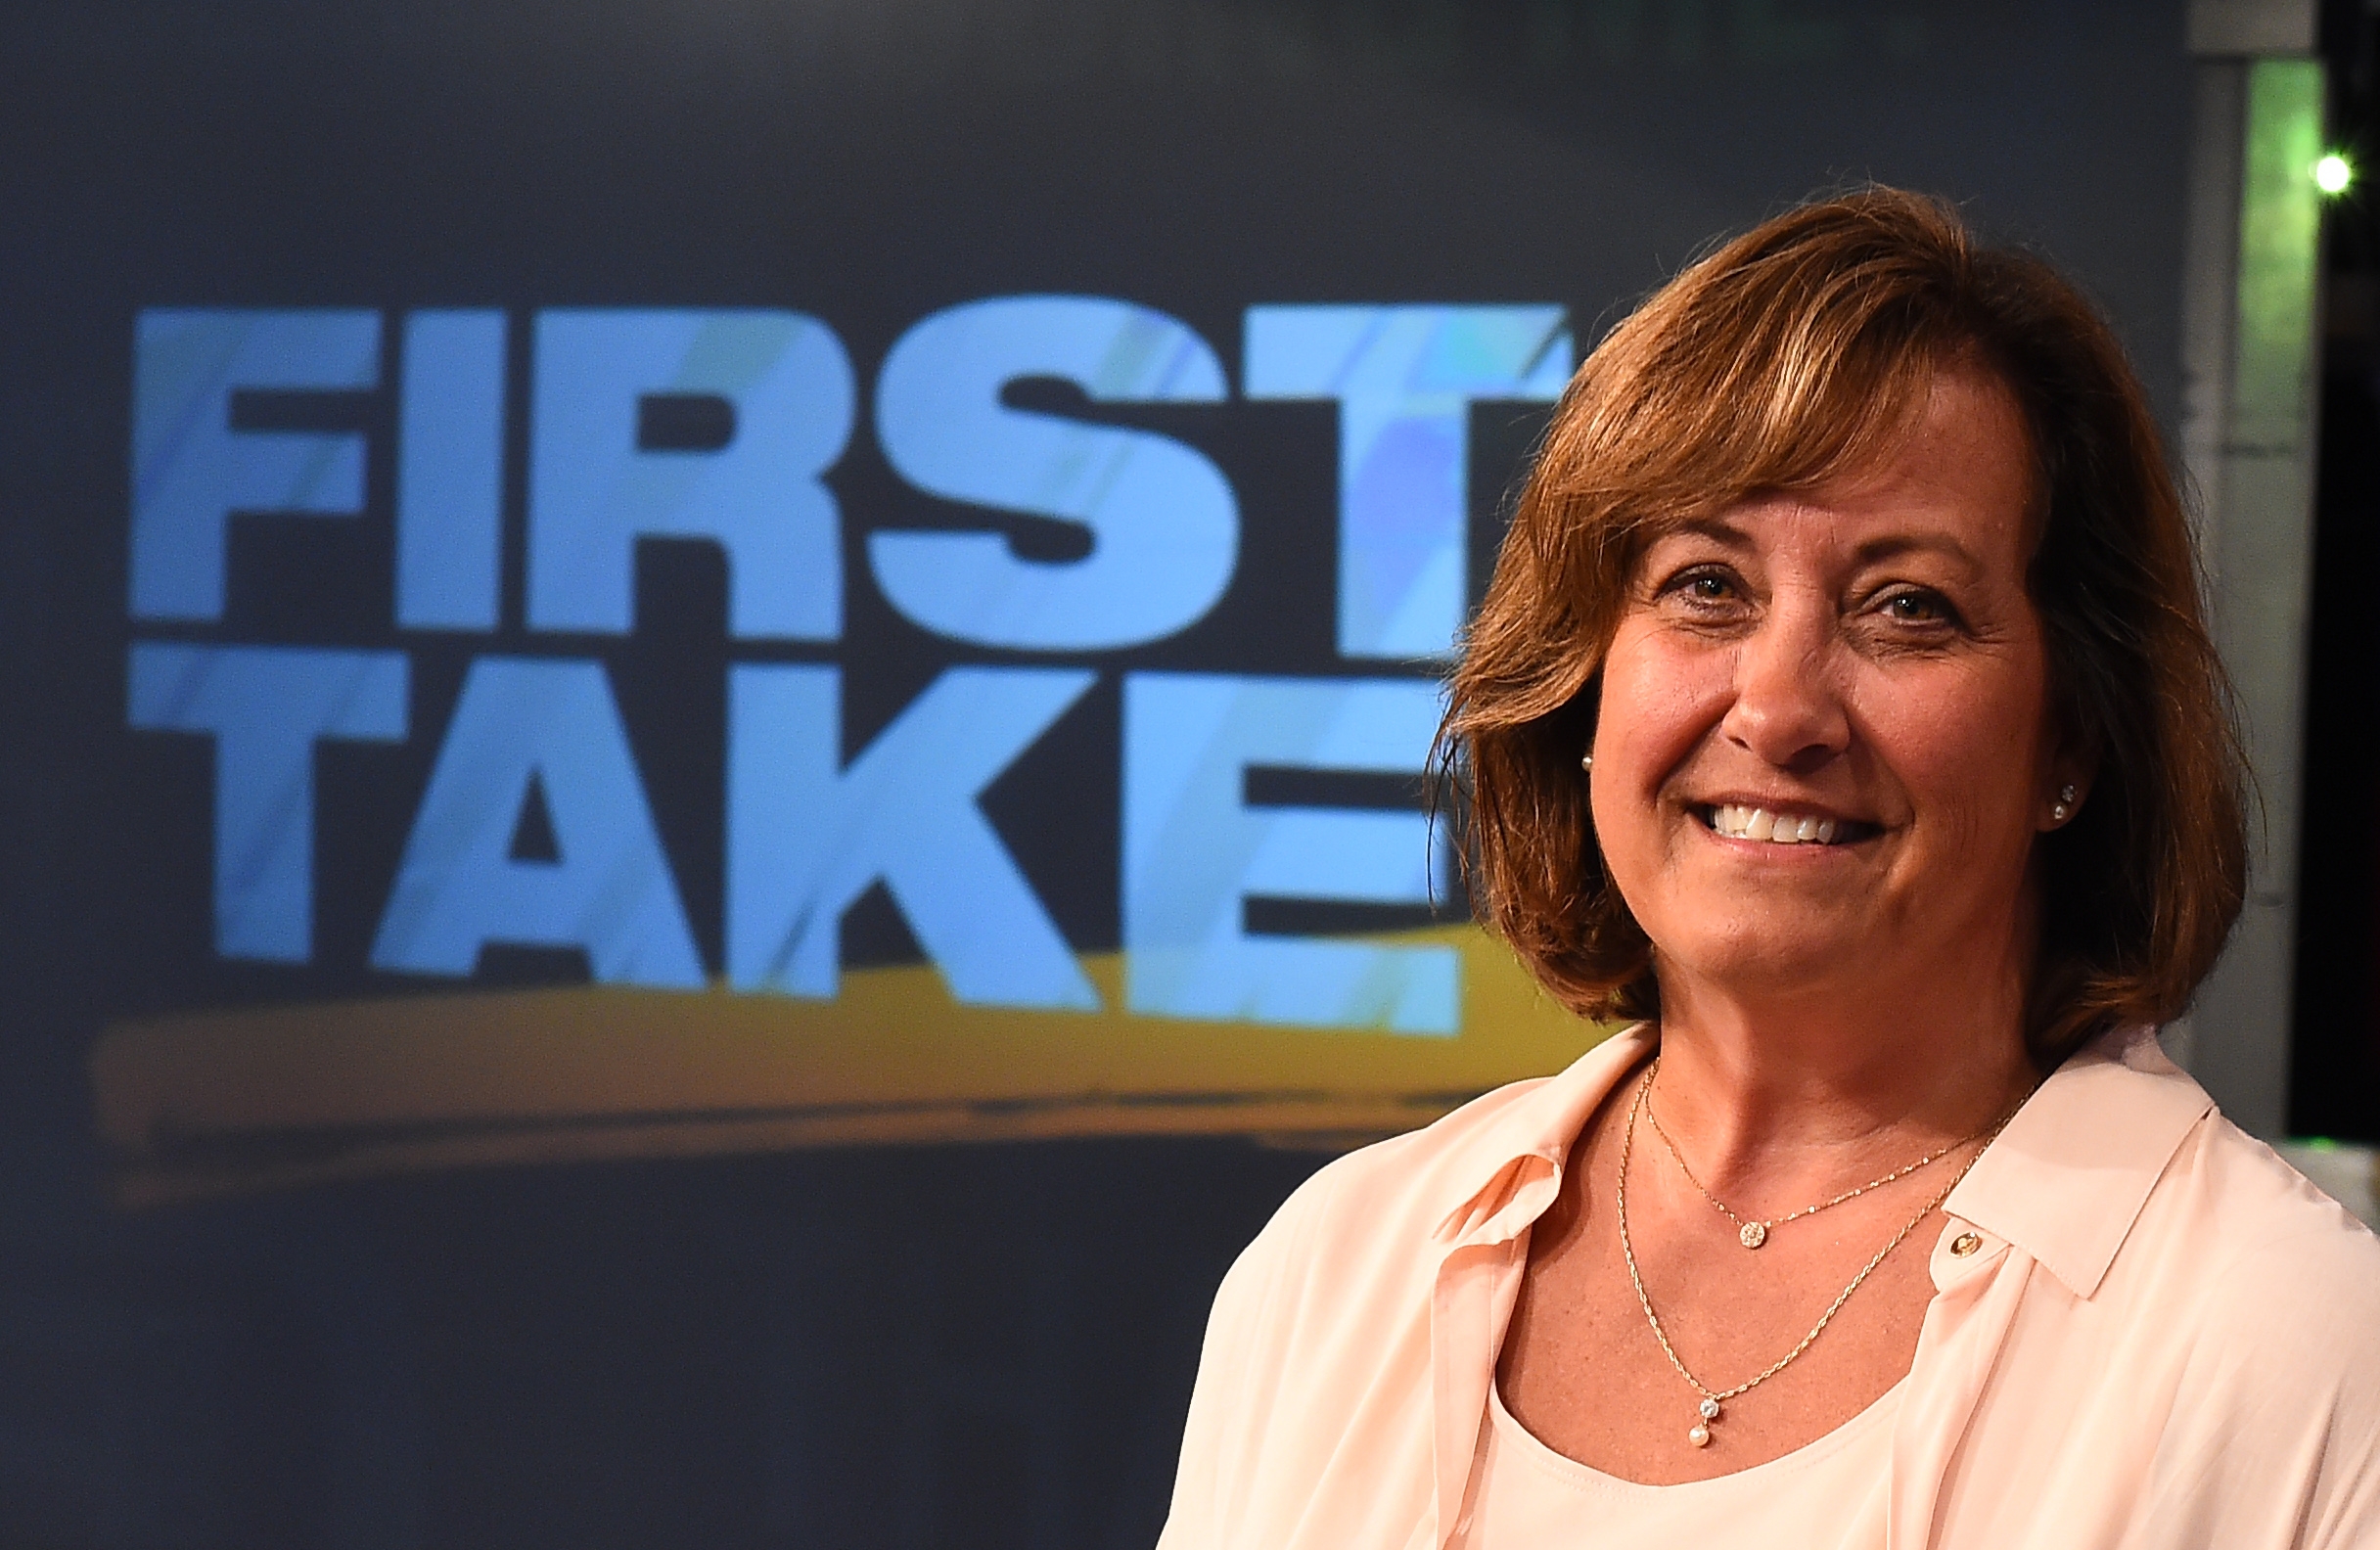 Vice president of production Marcia Keegan on the set of First Take. (Joe Faraoni/ESPN Images)